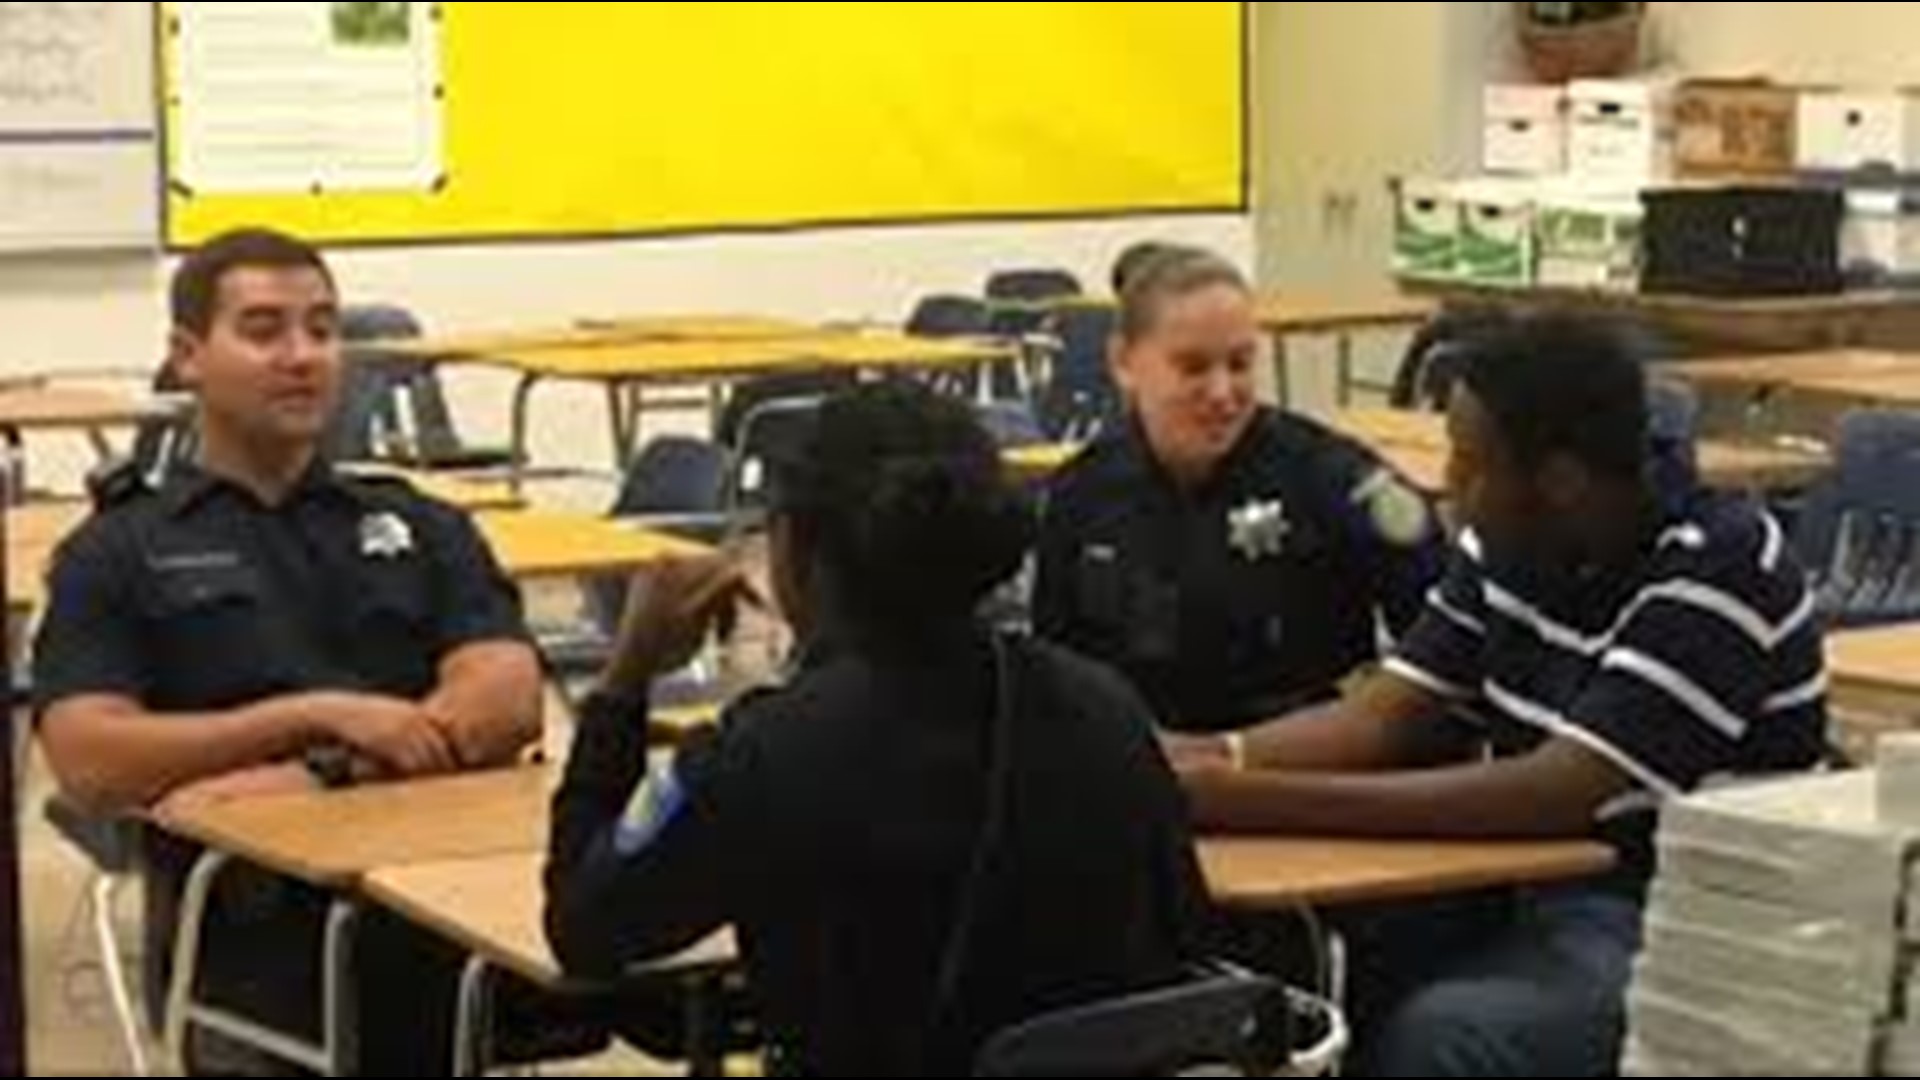 Sacramento City Unified School District officials are deciding on the future of the school resource officer position, and they're asking the community to voice their opinions.